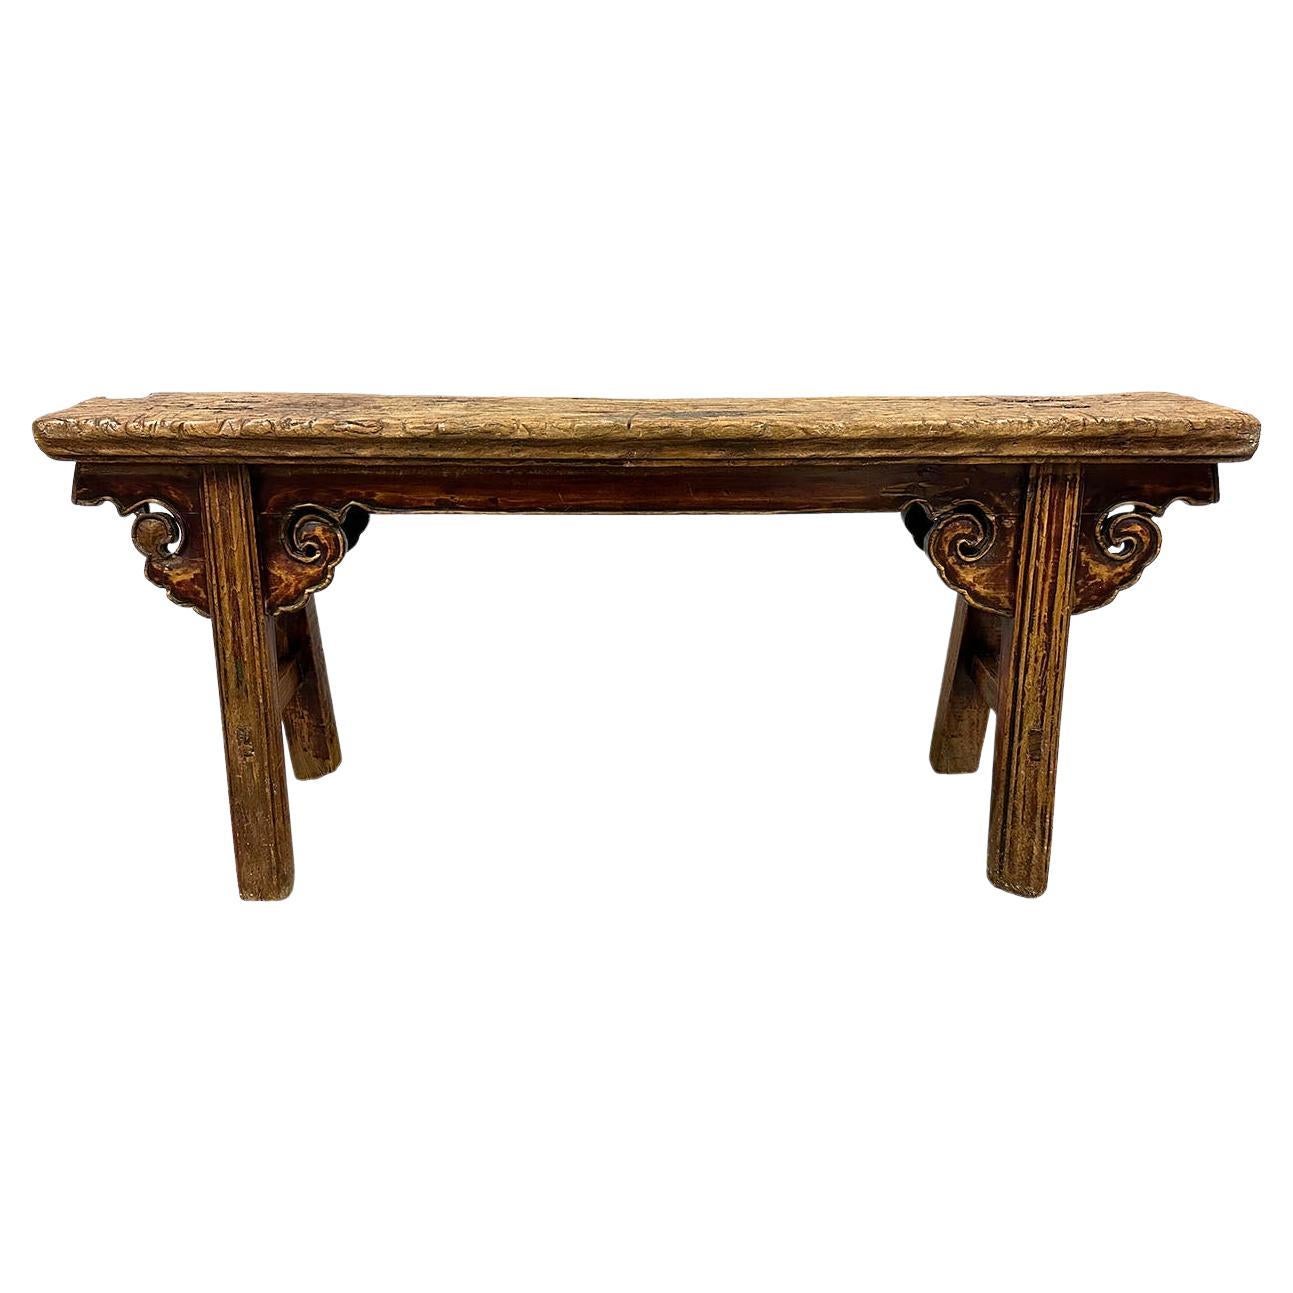 Late 19th Century Antique Chinese Country Bench/Coffee Table